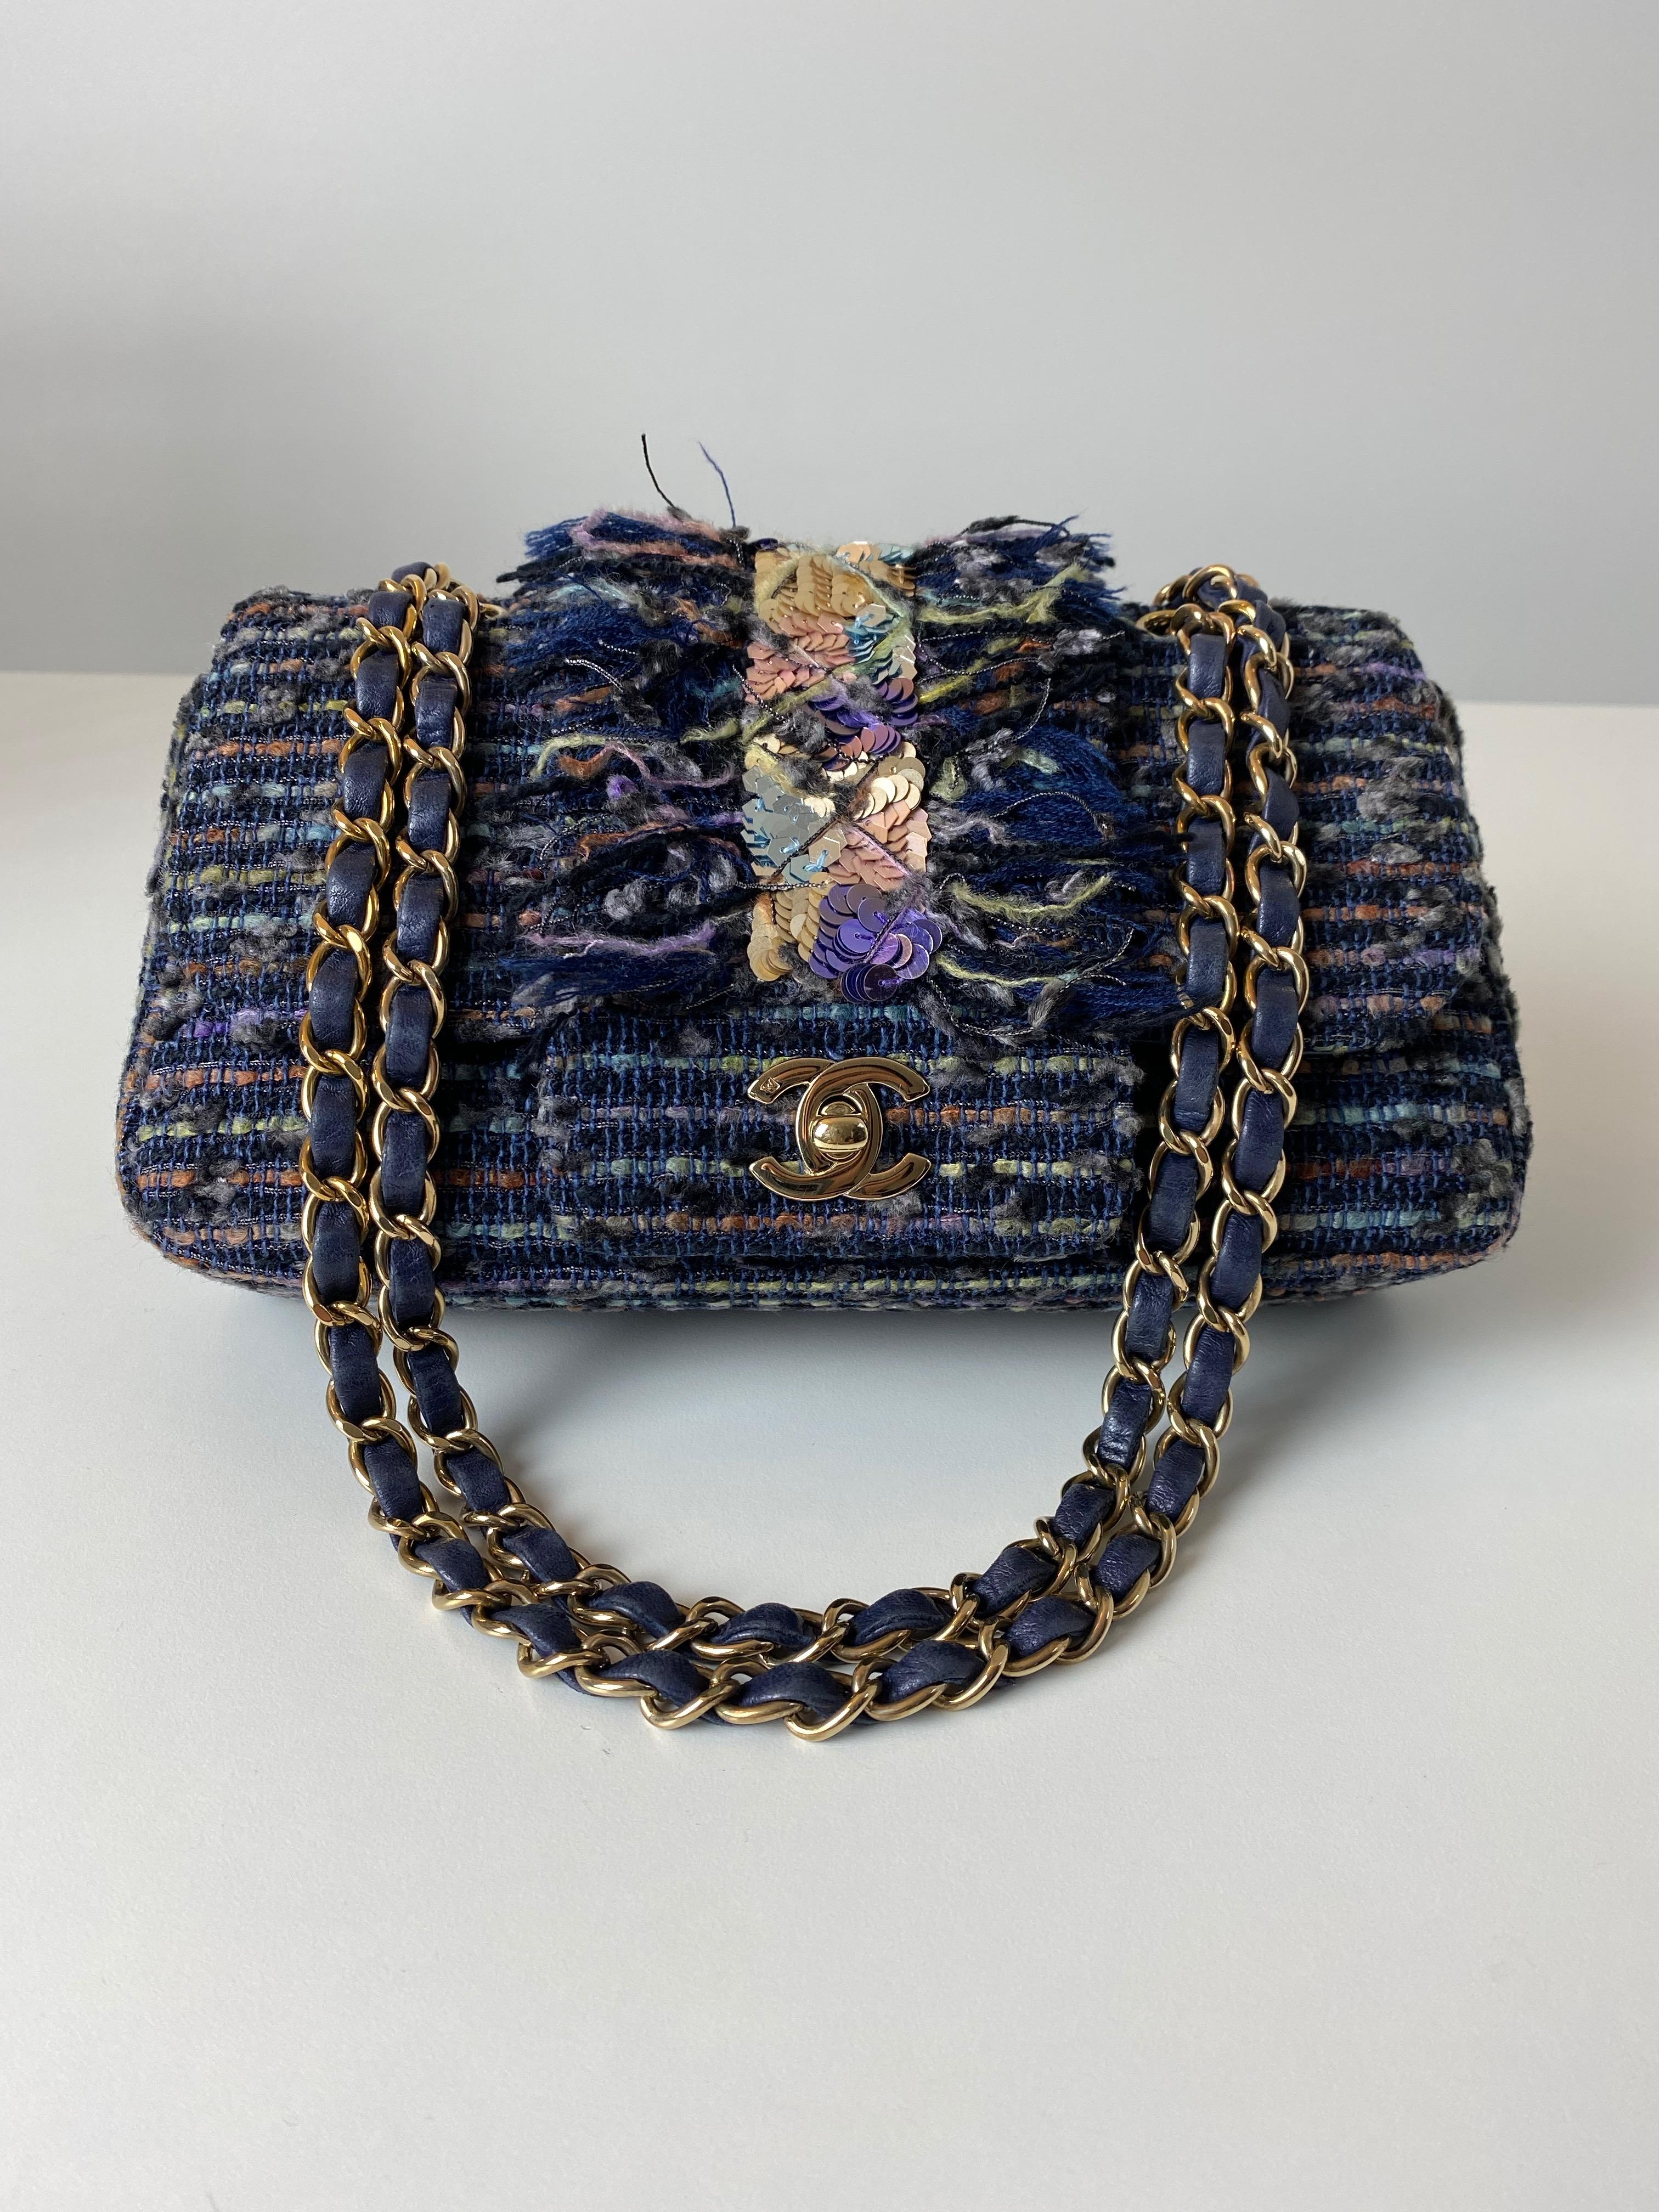 Chanel 2005 Classic Flap Vintage Jeweled Sequin Mermaid Navy Blue Tweed Bag For Sale 1